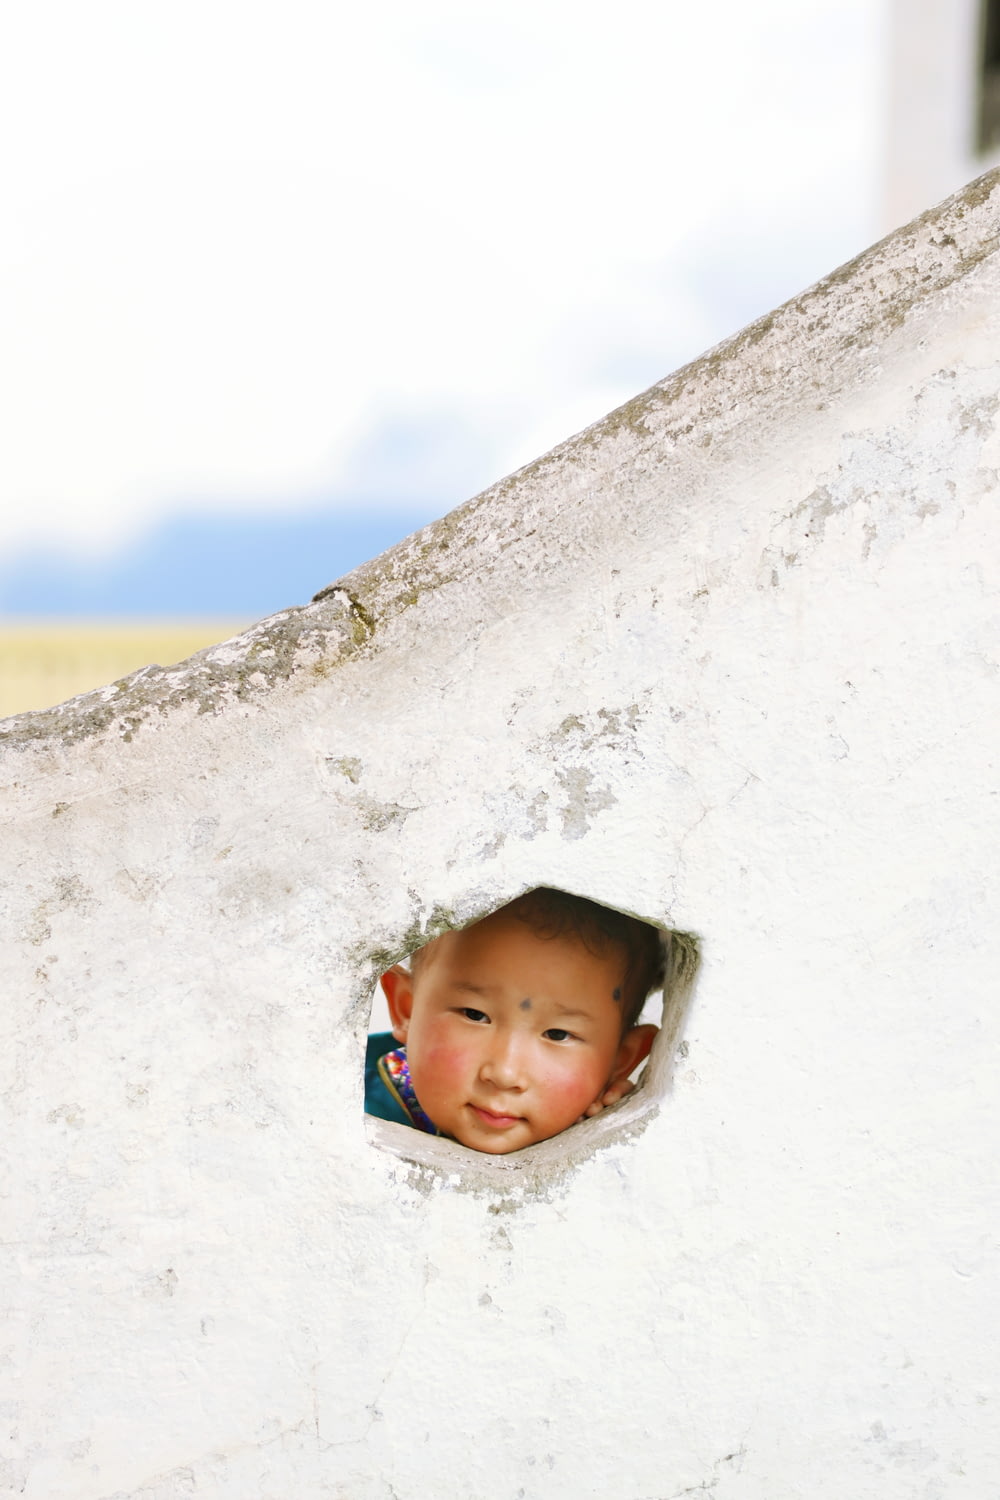 a boy peeking out of a hole in a wall